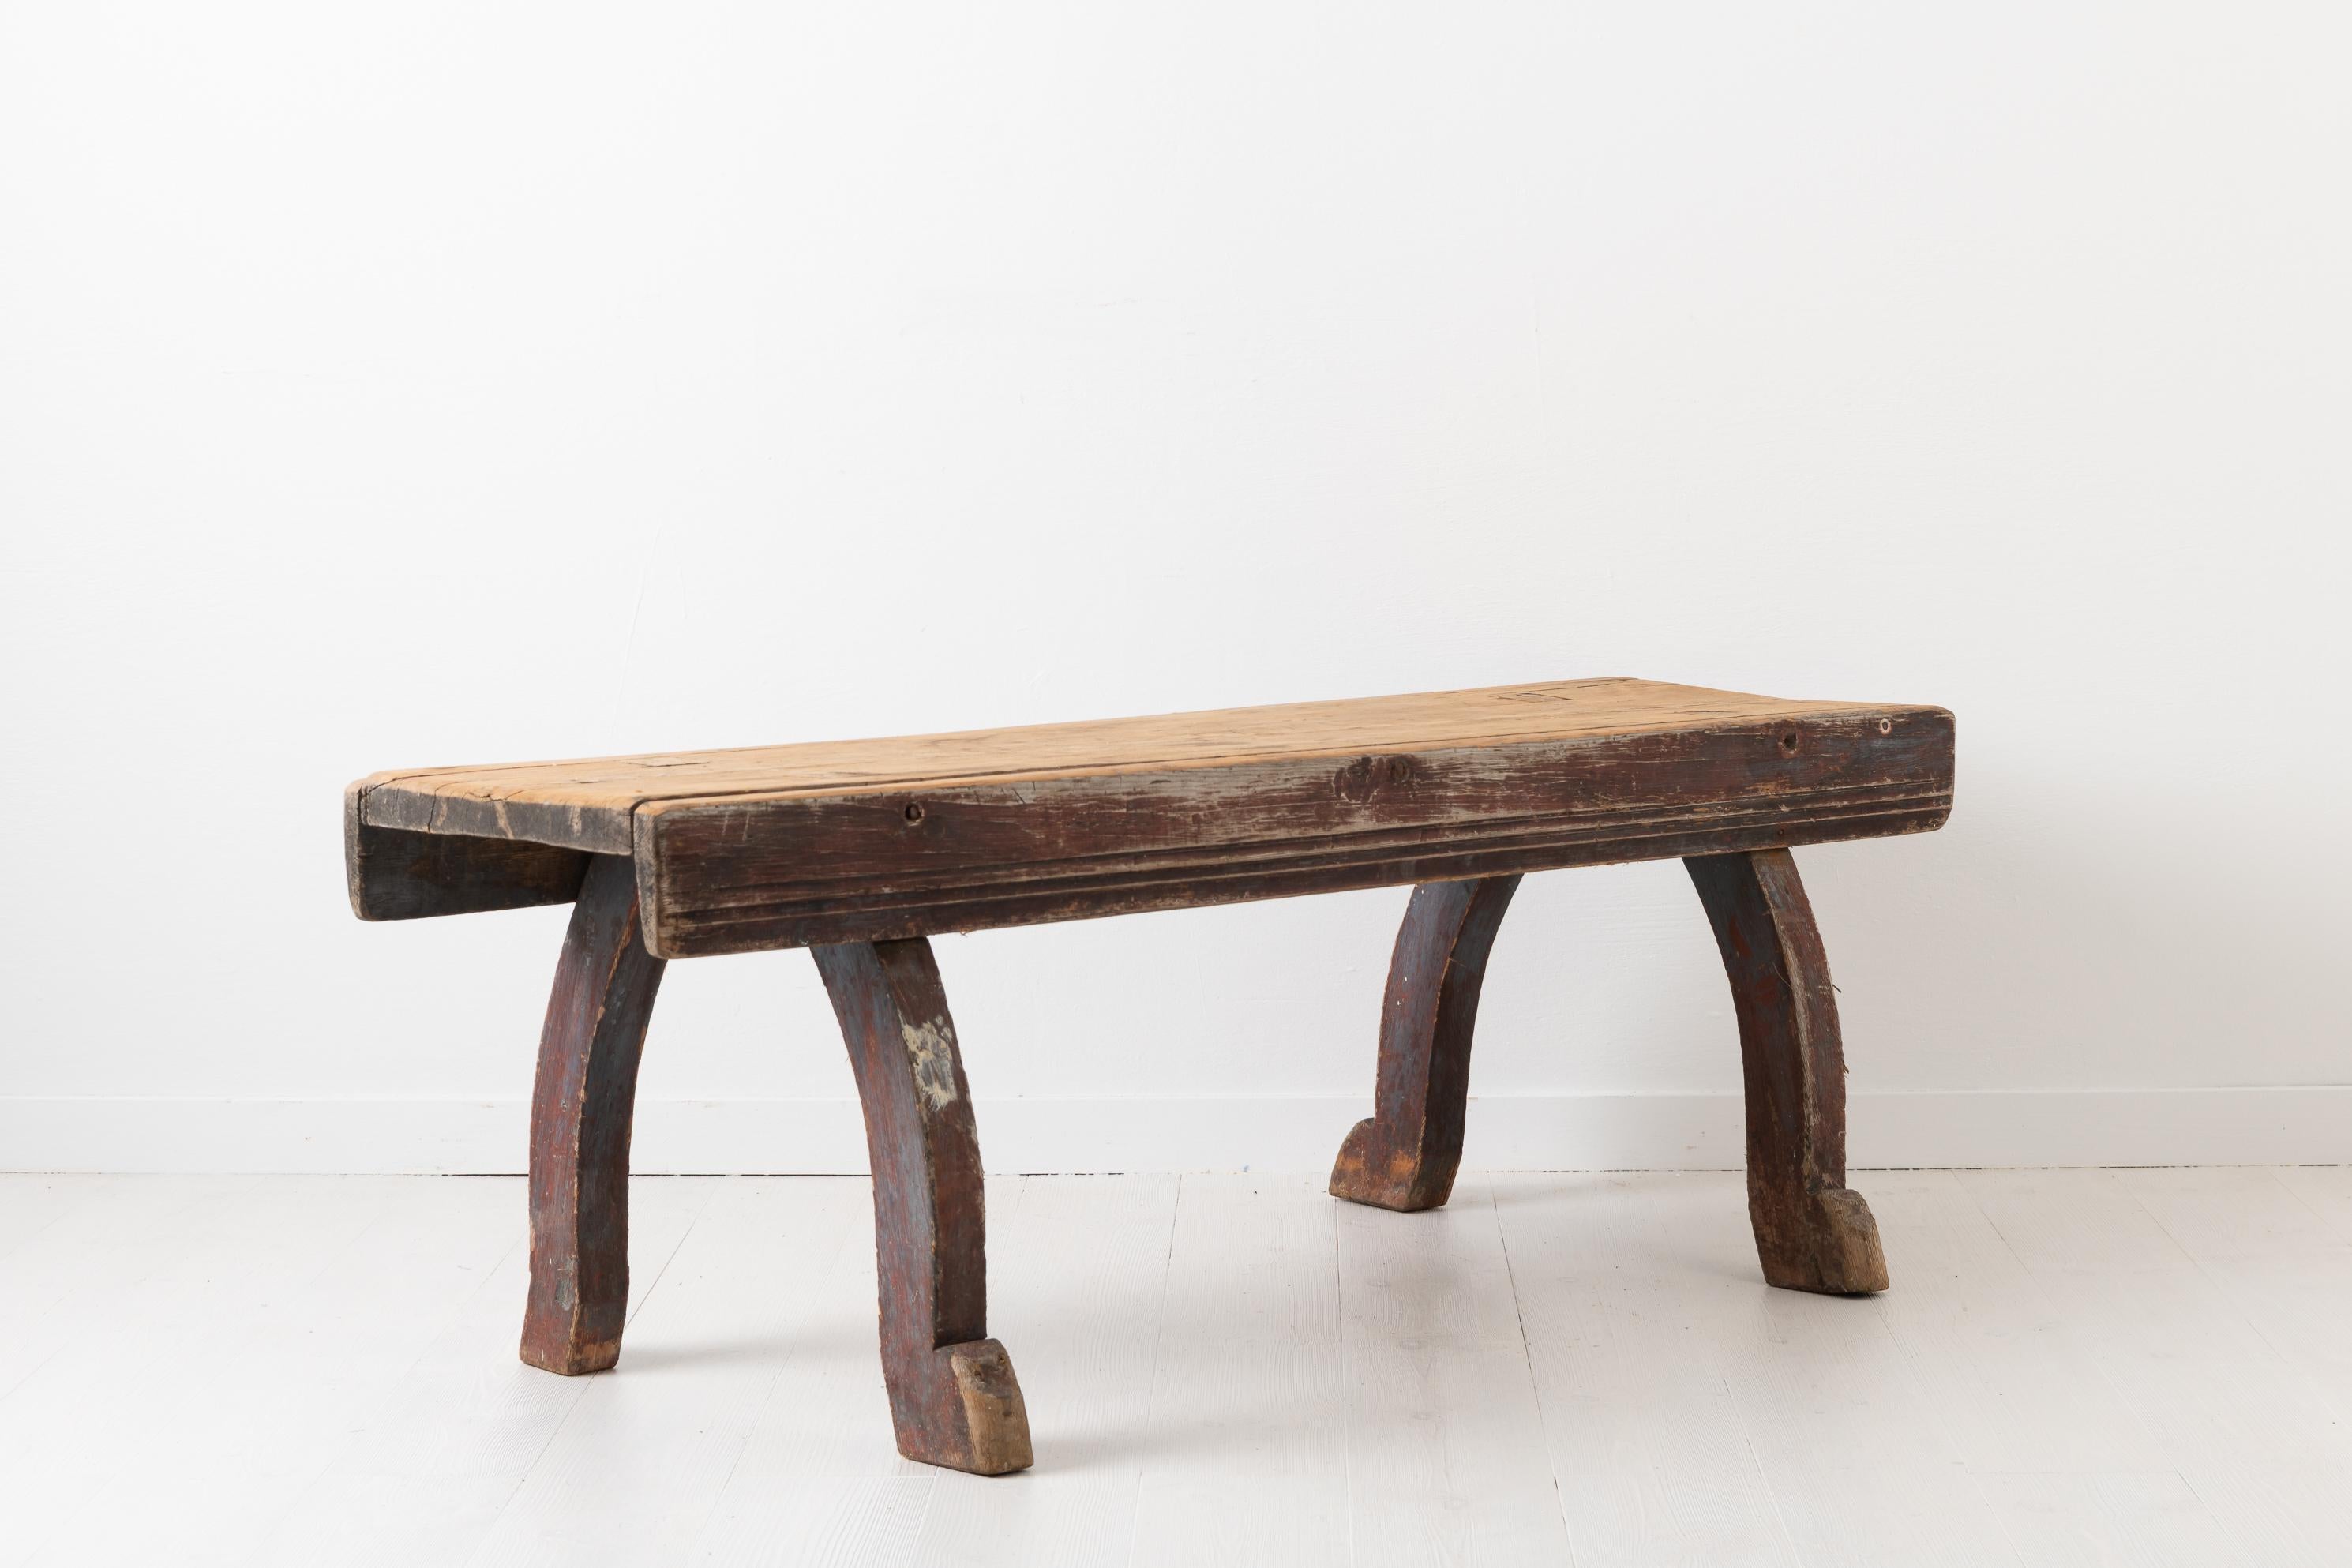 Northern Swedish Folk Art bench from the late 1700s. The bench is Primitive and rustic and has a lot of character, especially given the original distressed paint and authentic patina. The legs are curved in Rococo style and the edges of the seat